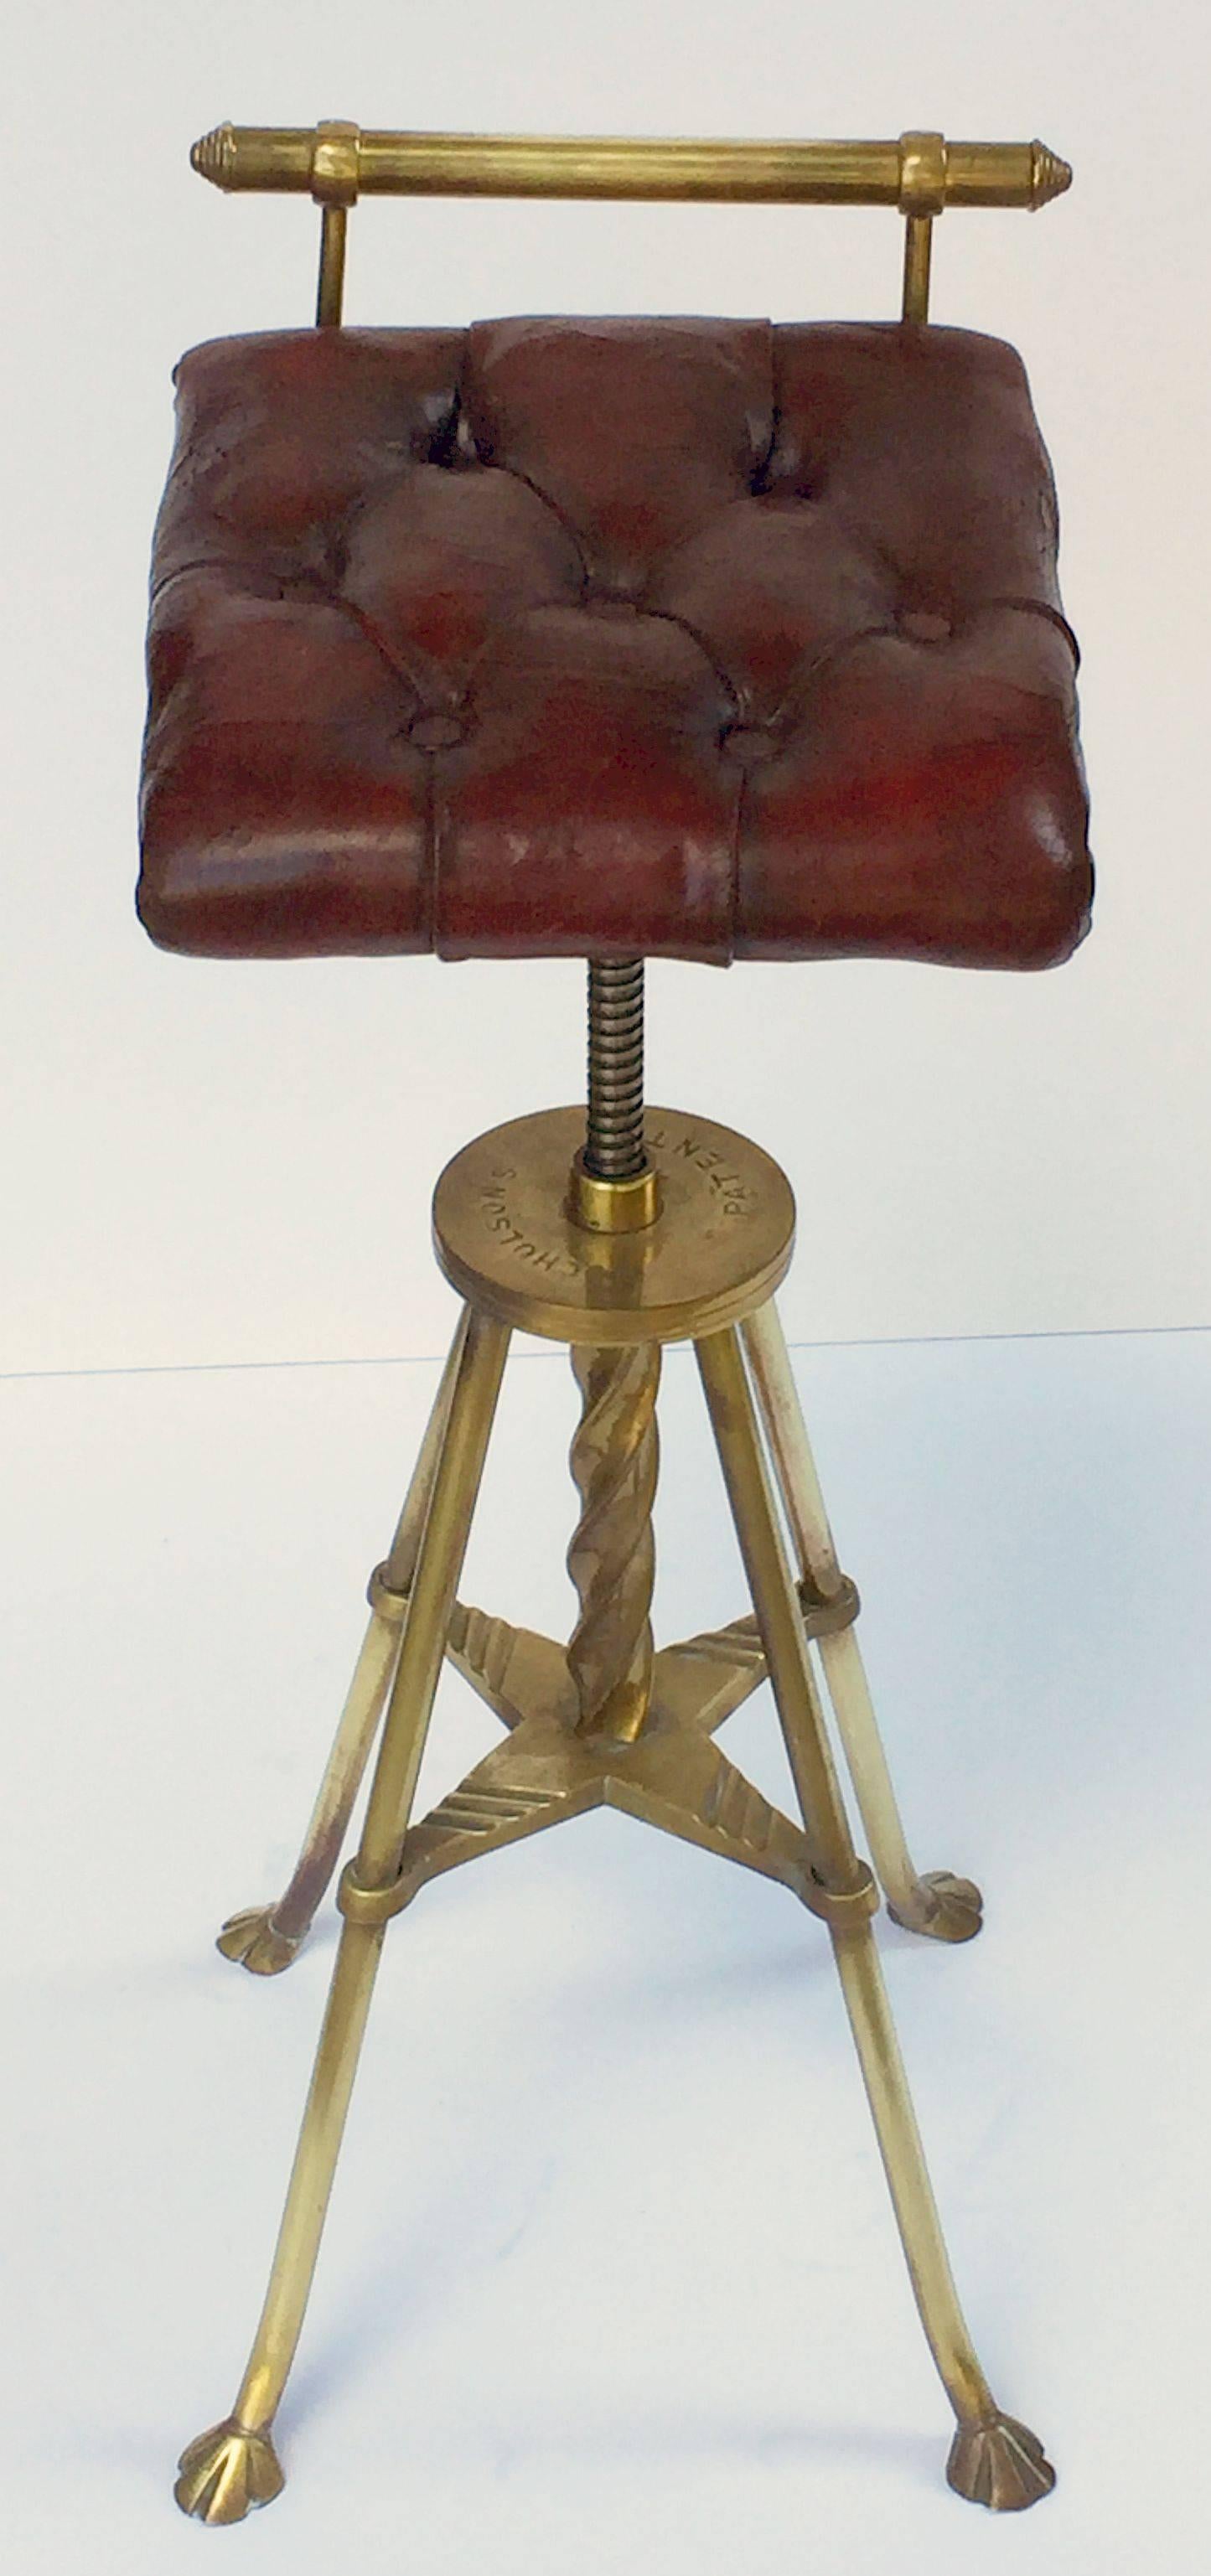 19th Century English Harpist's Stool of Brass with Original Button Leather Seat